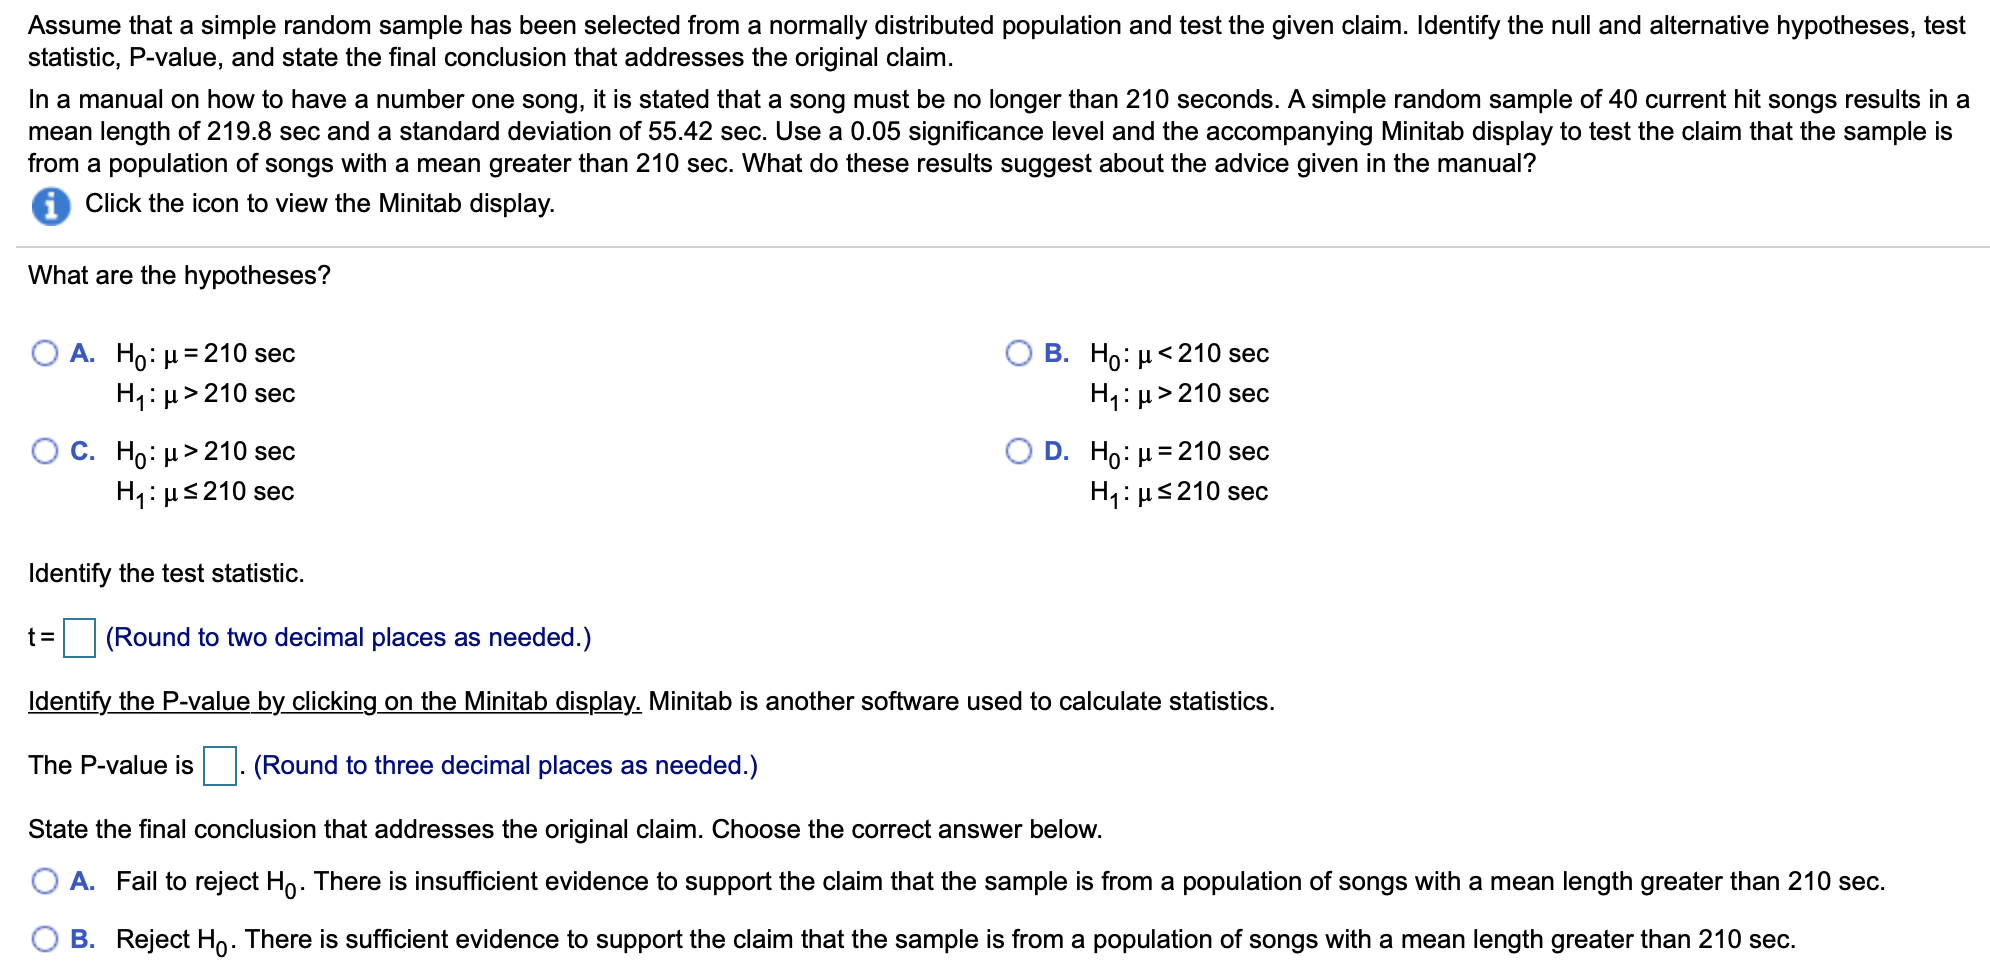 Assume that a simple random sample has been selected from a normally distributed population and test the given claim. Identify the null and alternative hypotheses, test
statistic, P-value, and state the final conclusion that addresses the original claim
In a manual on how to have a number one song, it is stated that a song must be no longer than 210 seconds. A simple random sample of 40 current hit songs results in a
mean length of 219.8 sec and a standard deviation of 55.42 sec. Use a 0.05 significance level and the accompanying Minitab display to test the claim that the sample is
from a population of songs with a mean greater than 210 sec. What do these results suggest about the advice given in the manual?
Click the icon to view the Minitab display.
What are the hypotheses?
А. Но: 3210 sec
HH210 sec
В. Но: и<210 sec
H1 H210 sec
О с. Но: и> 210 sec
H1 210 sec
D. Ho H 210 sec
H1 H 210 sec
Identify the test statistic
(Round to two decimal places as needed.)
Identify the P-value by clicking on the Minitab display. Minitab is another software used to calculate statistics
(Round to three decimal places as needed.)
The P-value is
State the final conclusion that addresses the original claim. Choose the correct answer below.
O A. Fail to reject Ho. There is insufficient evidence to support the claim that the sample is from a population of songs with a mean length greater than 210 sec
B. Reject Ho There is sufficient evidence to support the claim that the sample is from a population of songs with a mean length greater than 210 sec
